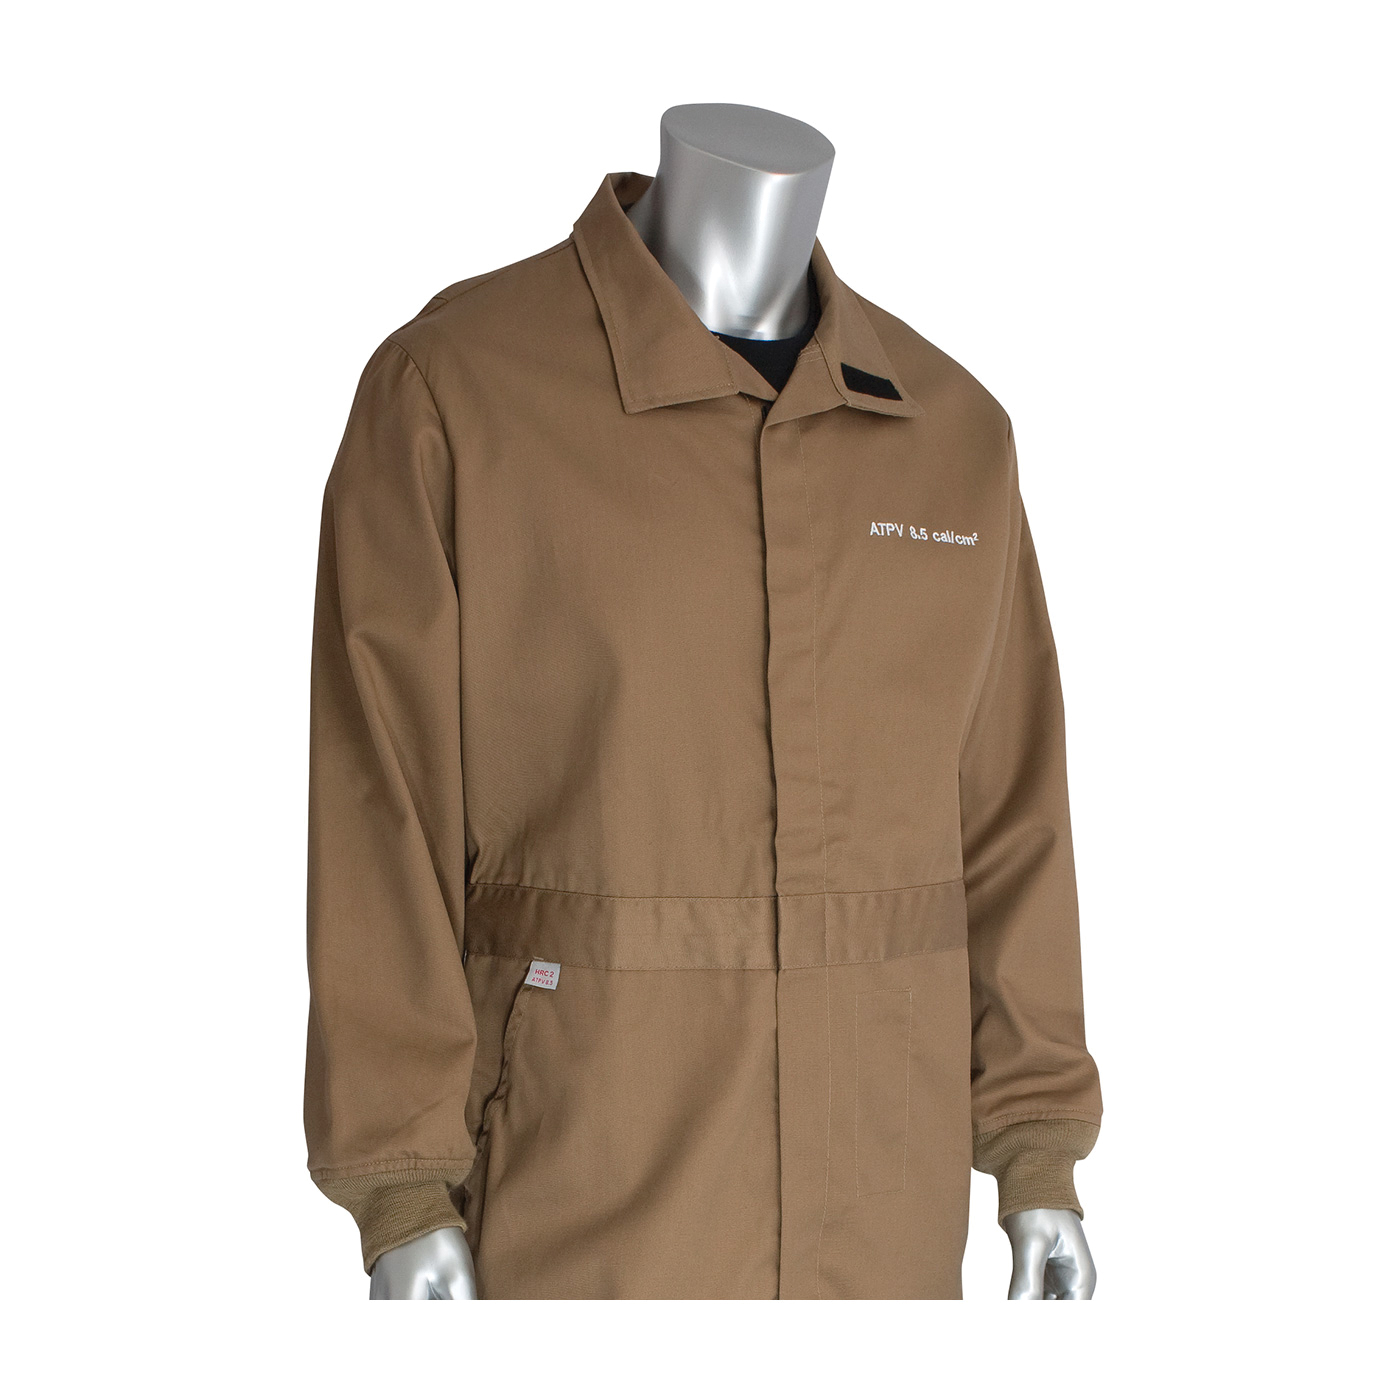 PIP® 9100-2110D/M Flame Resistant Coverall With Insect Repellant, M, Khaki, 90% Cotton/10% Nylon/FR and Bug Repellent Twill Weave, 40 to 42 in Chest, 32 in L Inseam